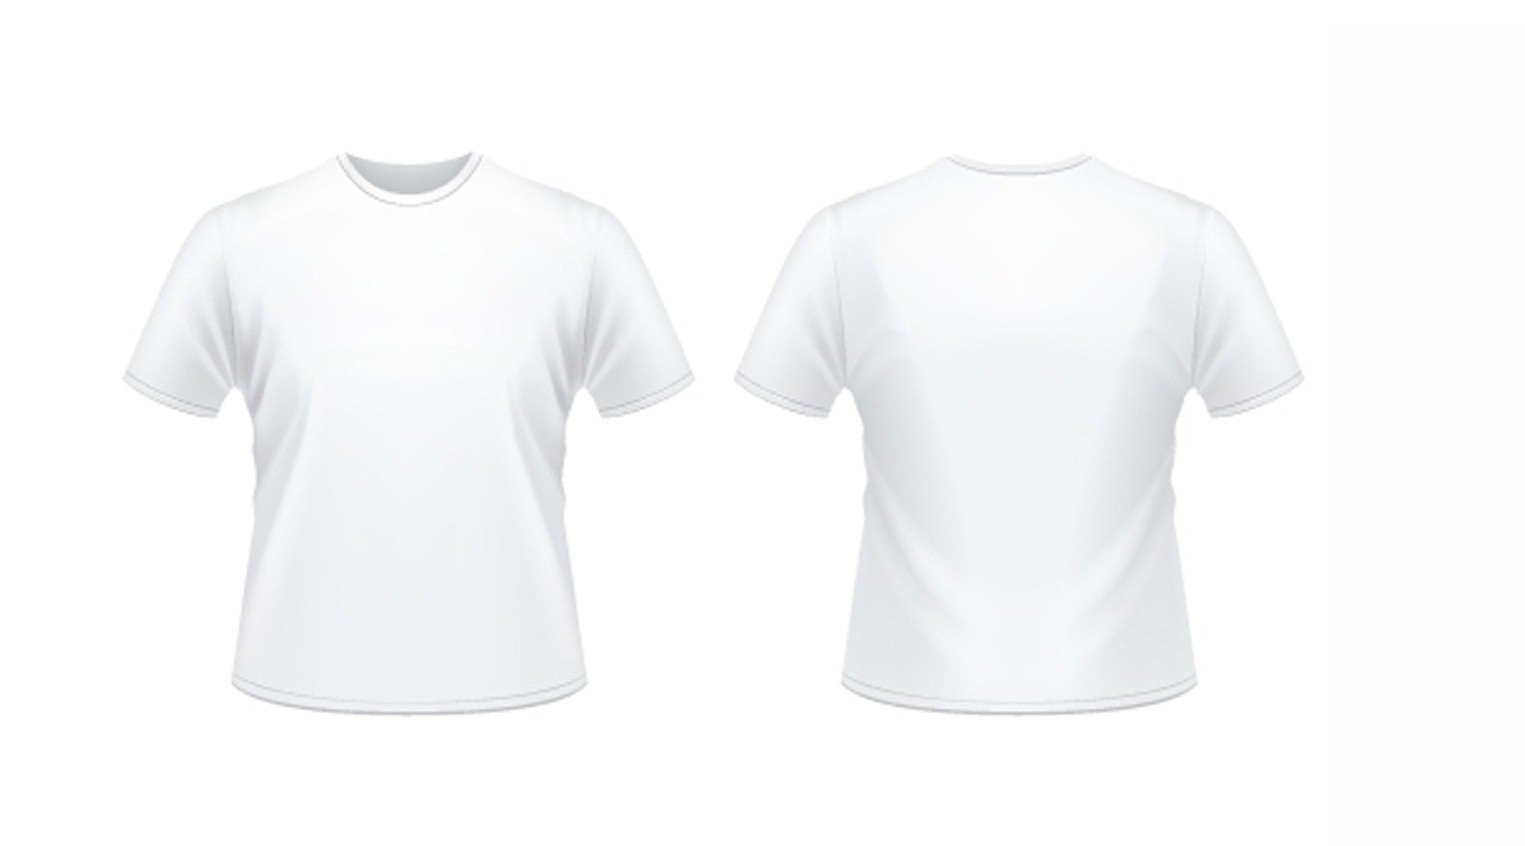 T-Shirt Template: A Guide to Designing Your Own T-Shirt